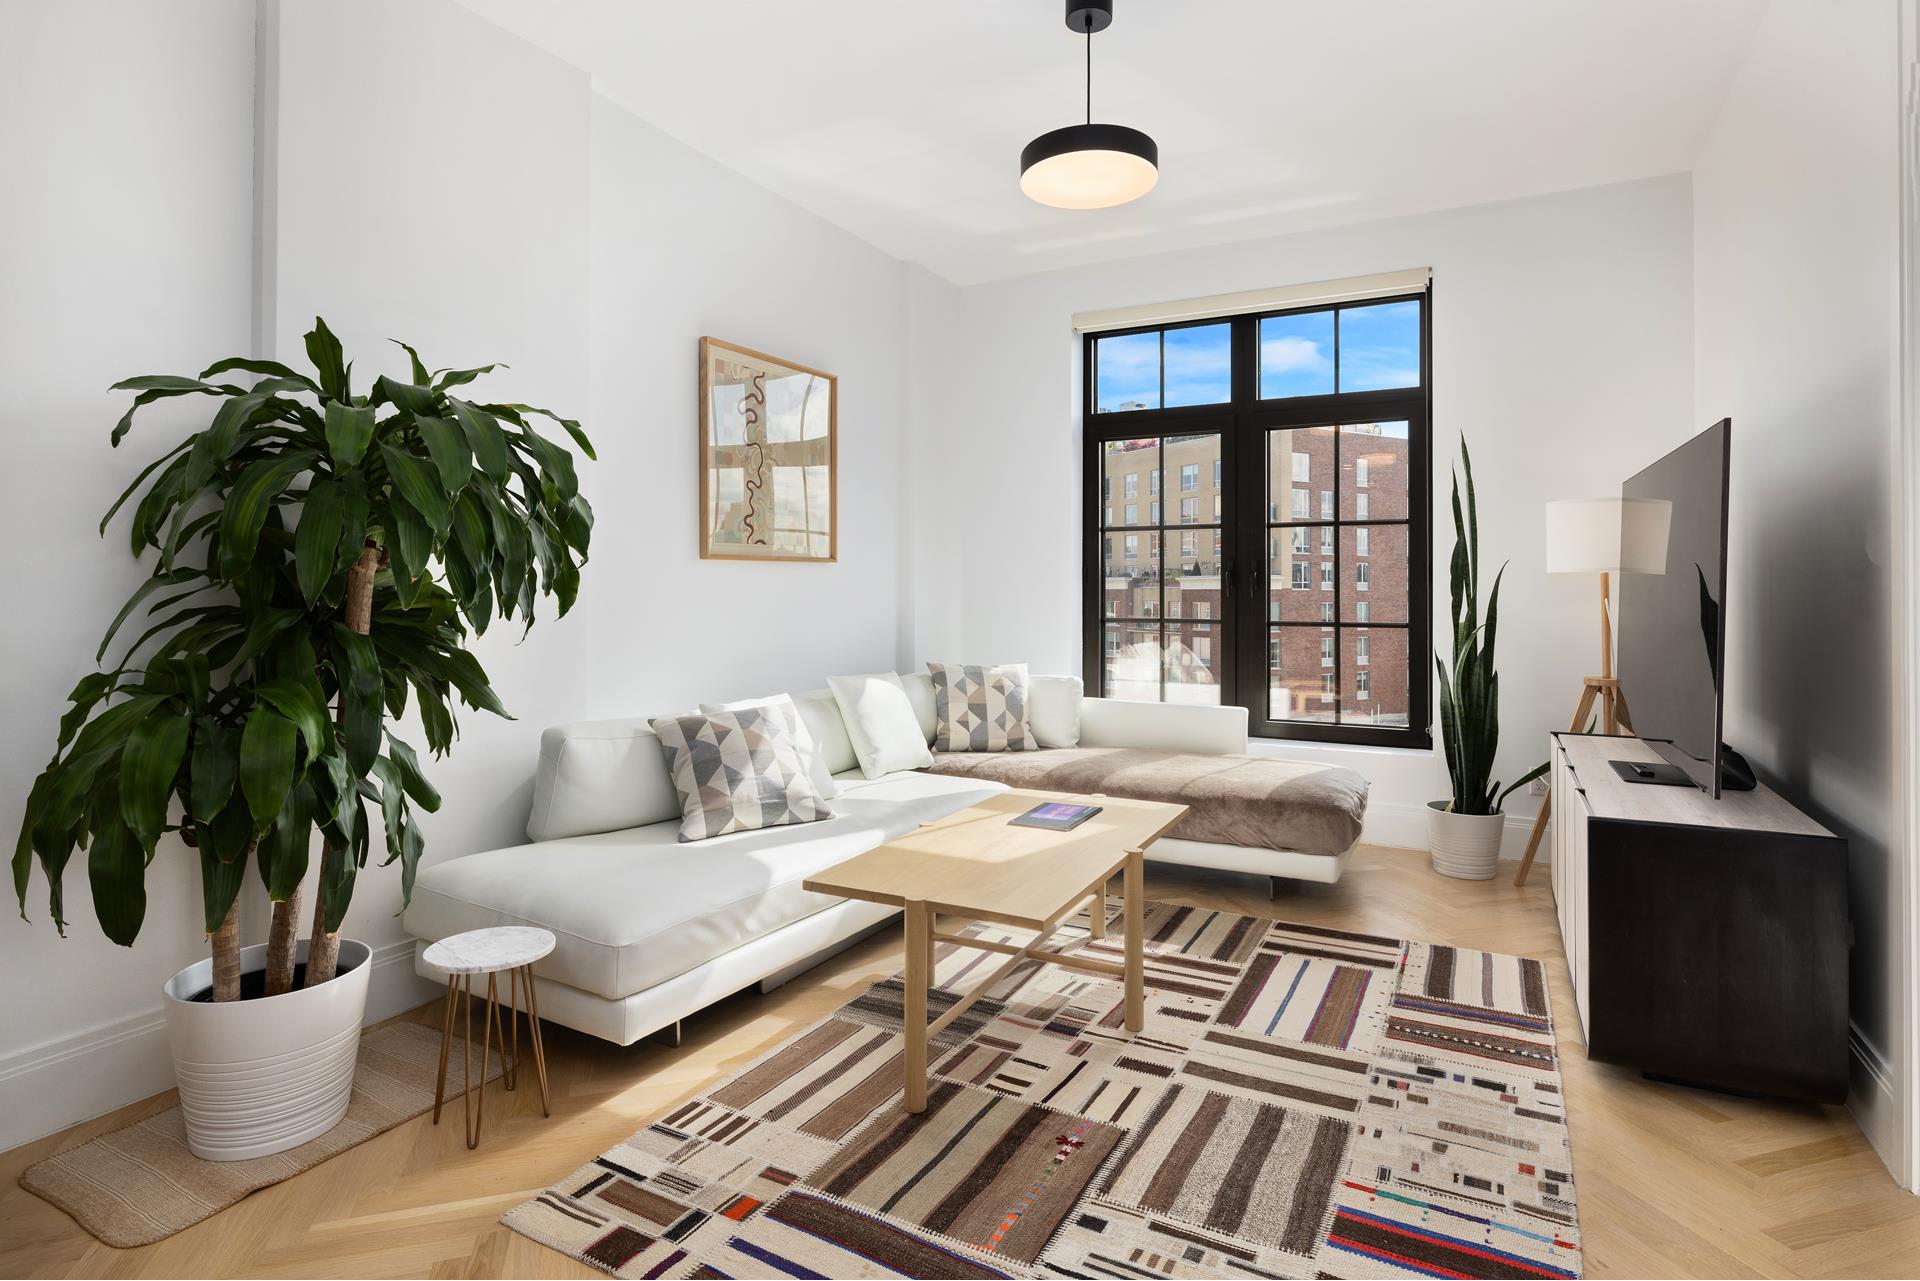 300 West 122nd Street 9F, South Harlem, Upper Manhattan, NYC - 1 Bedrooms  
1 Bathrooms  
3 Rooms - 